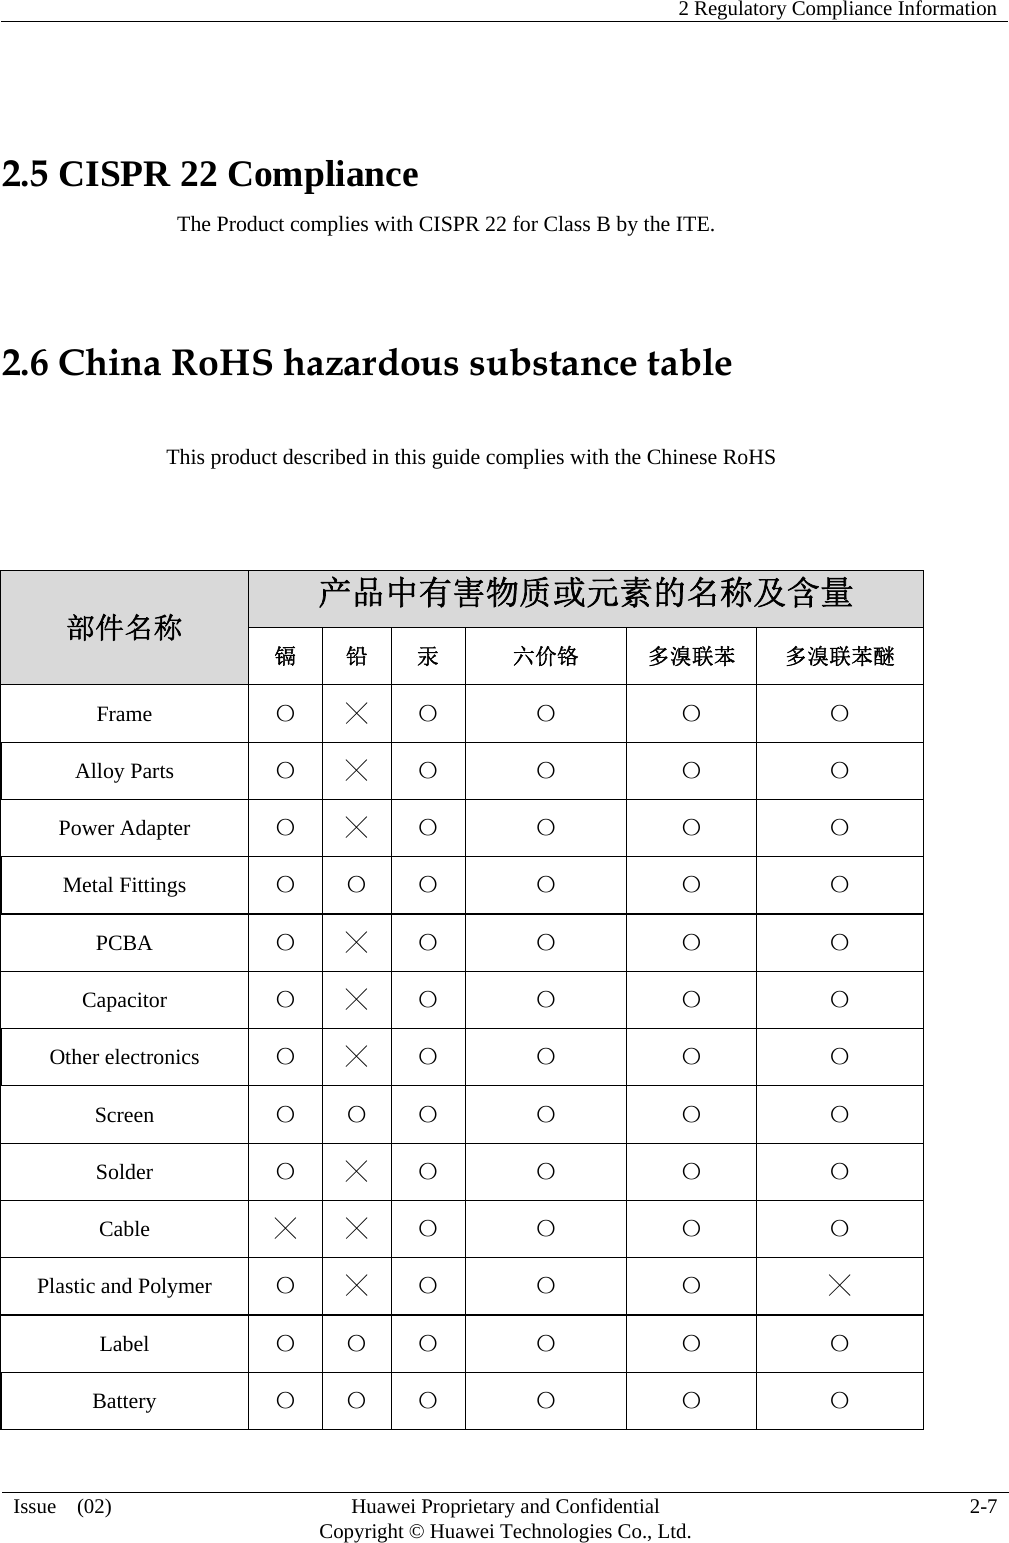    2 Regulatory Compliance Information   Issue  (02)  Huawei Proprietary and Confidential     Copyright © Huawei Technologies Co., Ltd.  2-7   2.5 CISPR 22 Compliance                                 The Product complies with CISPR 22 for Class B by the ITE.  2.6 China RoHS hazardous substance table                 This product described in this guide complies with the Chinese RoHS   部件名称 产品中有害物质或元素的名称及含量 镉 铅 汞 六价铬 多溴联苯 多溴联苯醚 Frame  〇 ╳ 〇 〇 〇 〇 Alloy Parts  〇 ╳ 〇 〇 〇 〇 Power Adapter  〇 ╳ 〇 〇 〇 〇 Metal Fittings  〇 〇 〇 〇 〇 〇 PCBA  〇 ╳ 〇 〇 〇 〇 Capacitor  〇 ╳ 〇 〇 〇 〇 Other electronics  〇 ╳ 〇 〇 〇 〇 Screen  〇 〇 〇 〇 〇 〇 Solder  〇 ╳ 〇 〇 〇 〇 Cable  ╳ ╳ 〇 〇 〇 〇 Plastic and Polymer  〇 ╳ 〇 〇 〇 ╳ Label  〇 〇 〇 〇 〇 〇 Battery  〇 〇 〇 〇 〇 〇 